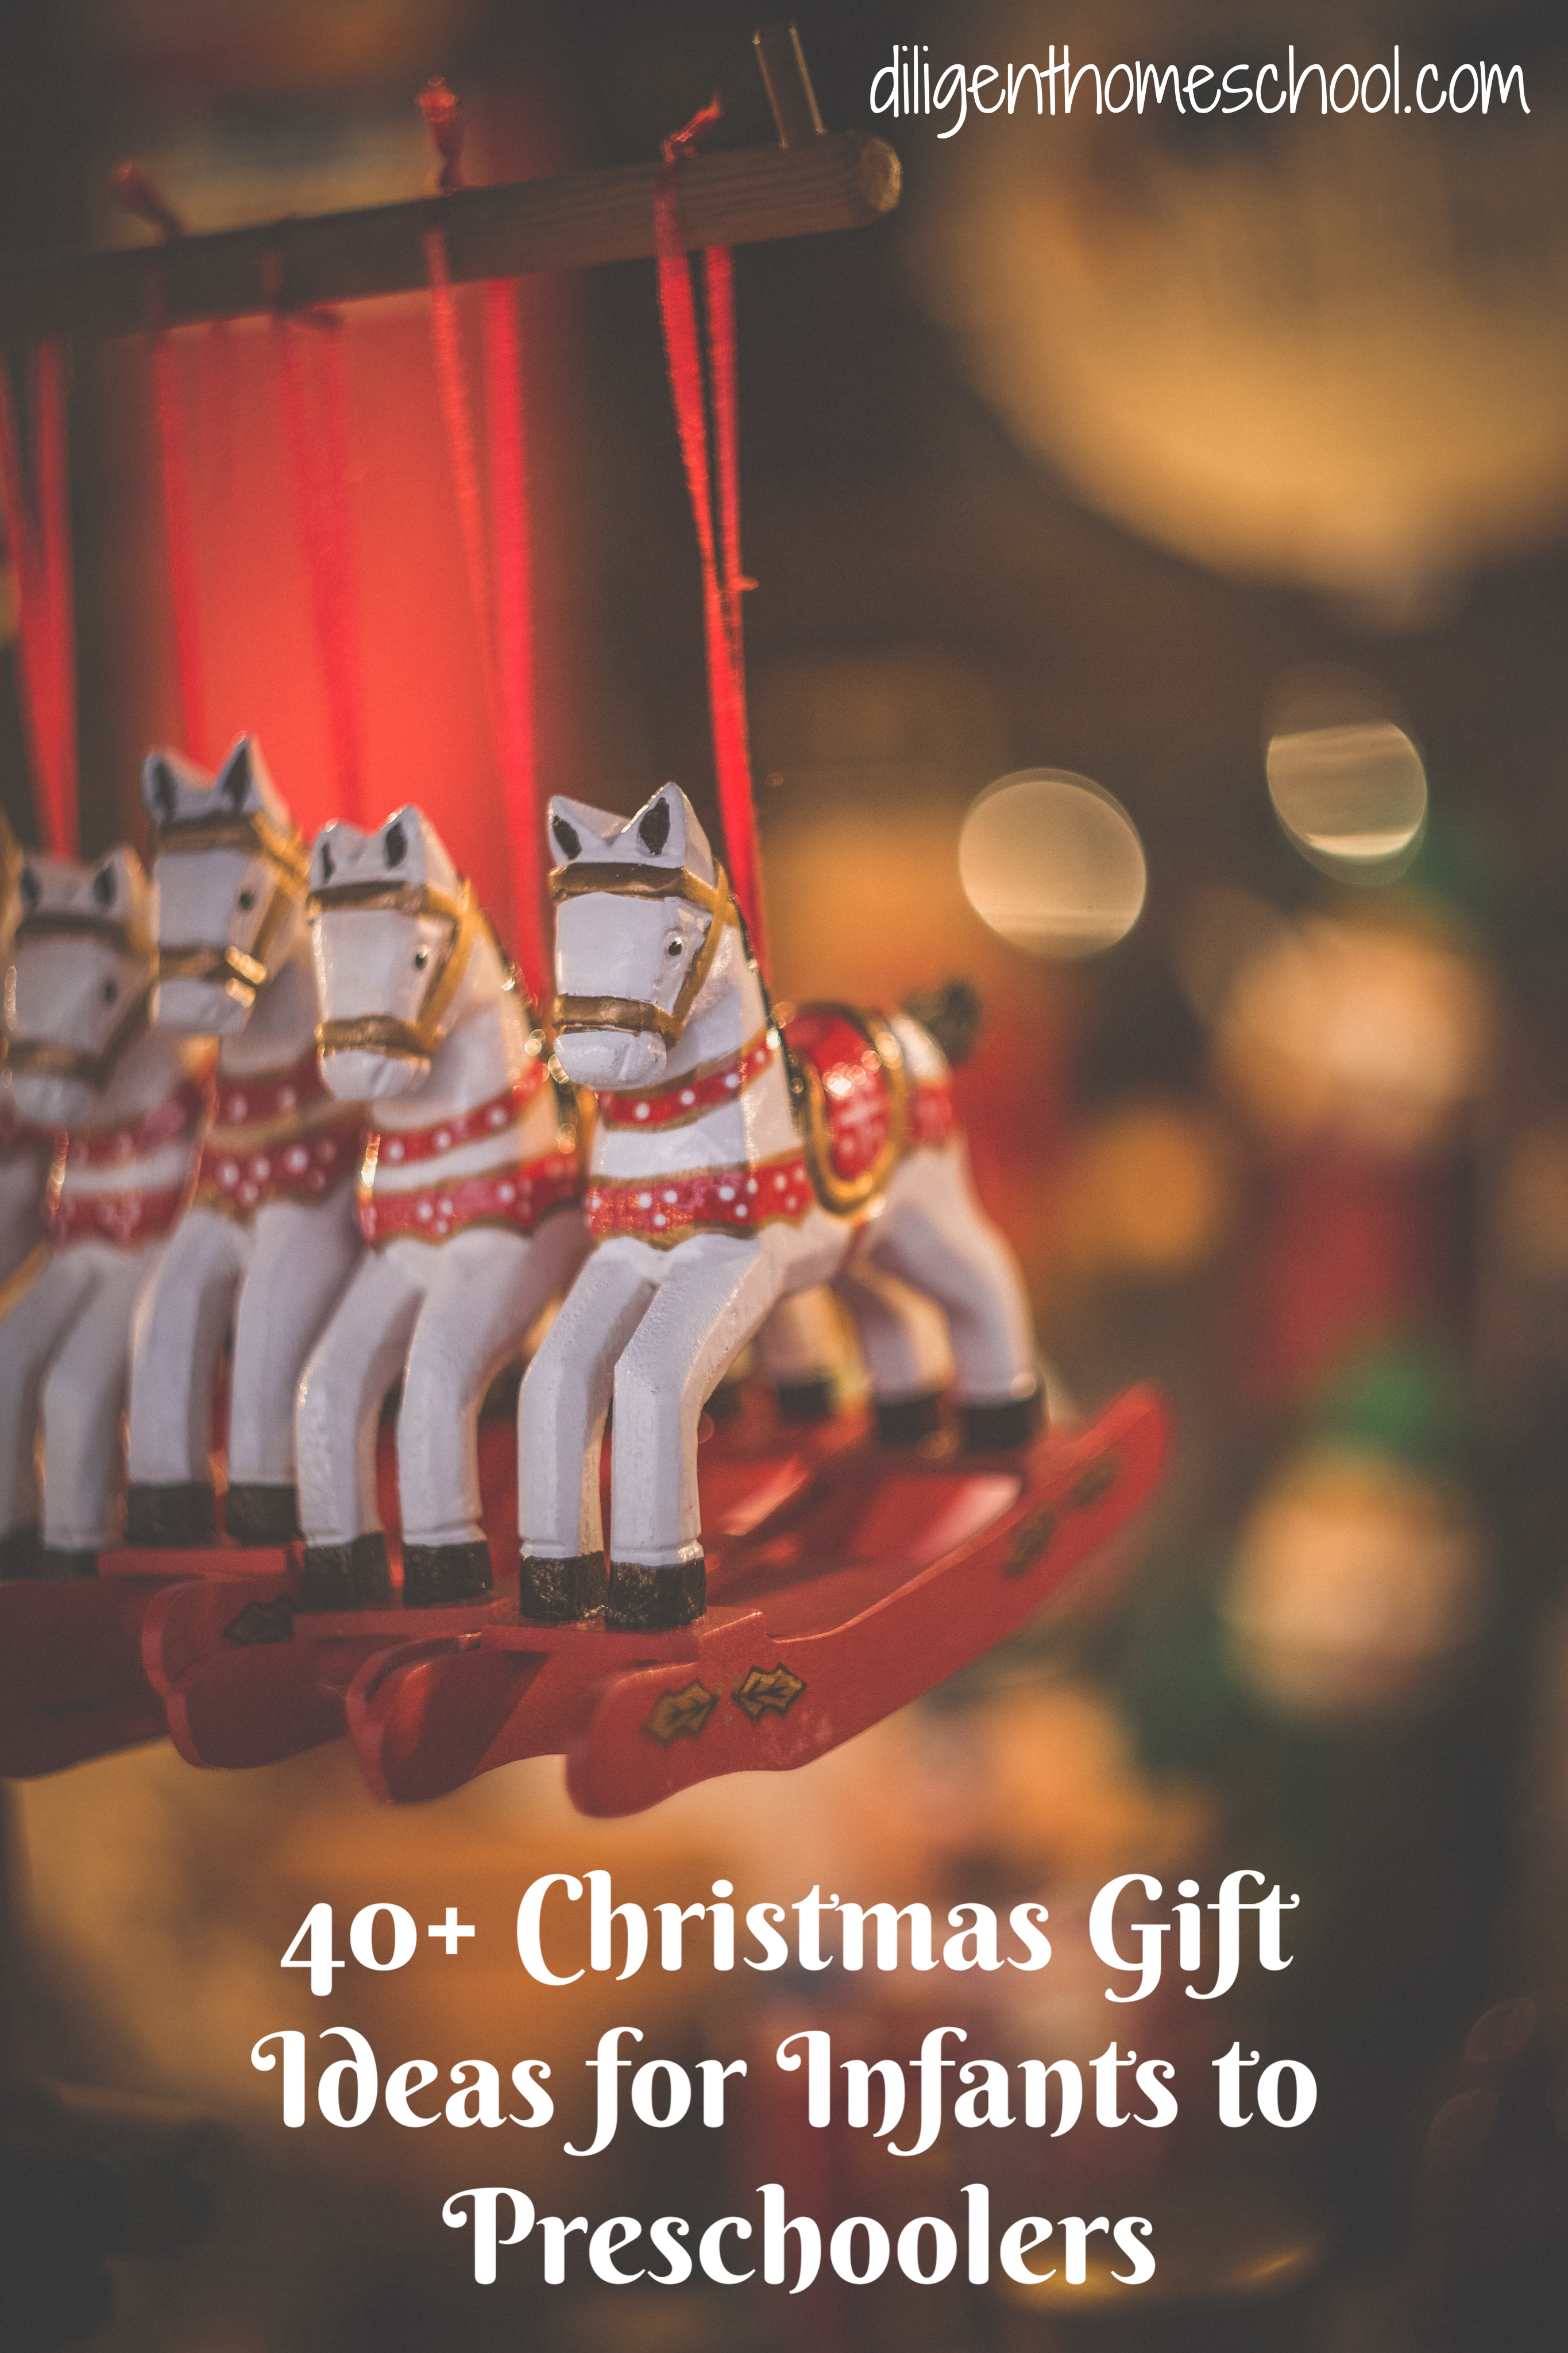 Still have Christmas shopping left to complete? Our list of gift ideas will make it all a bit easier as you peruse our list and shop from home!